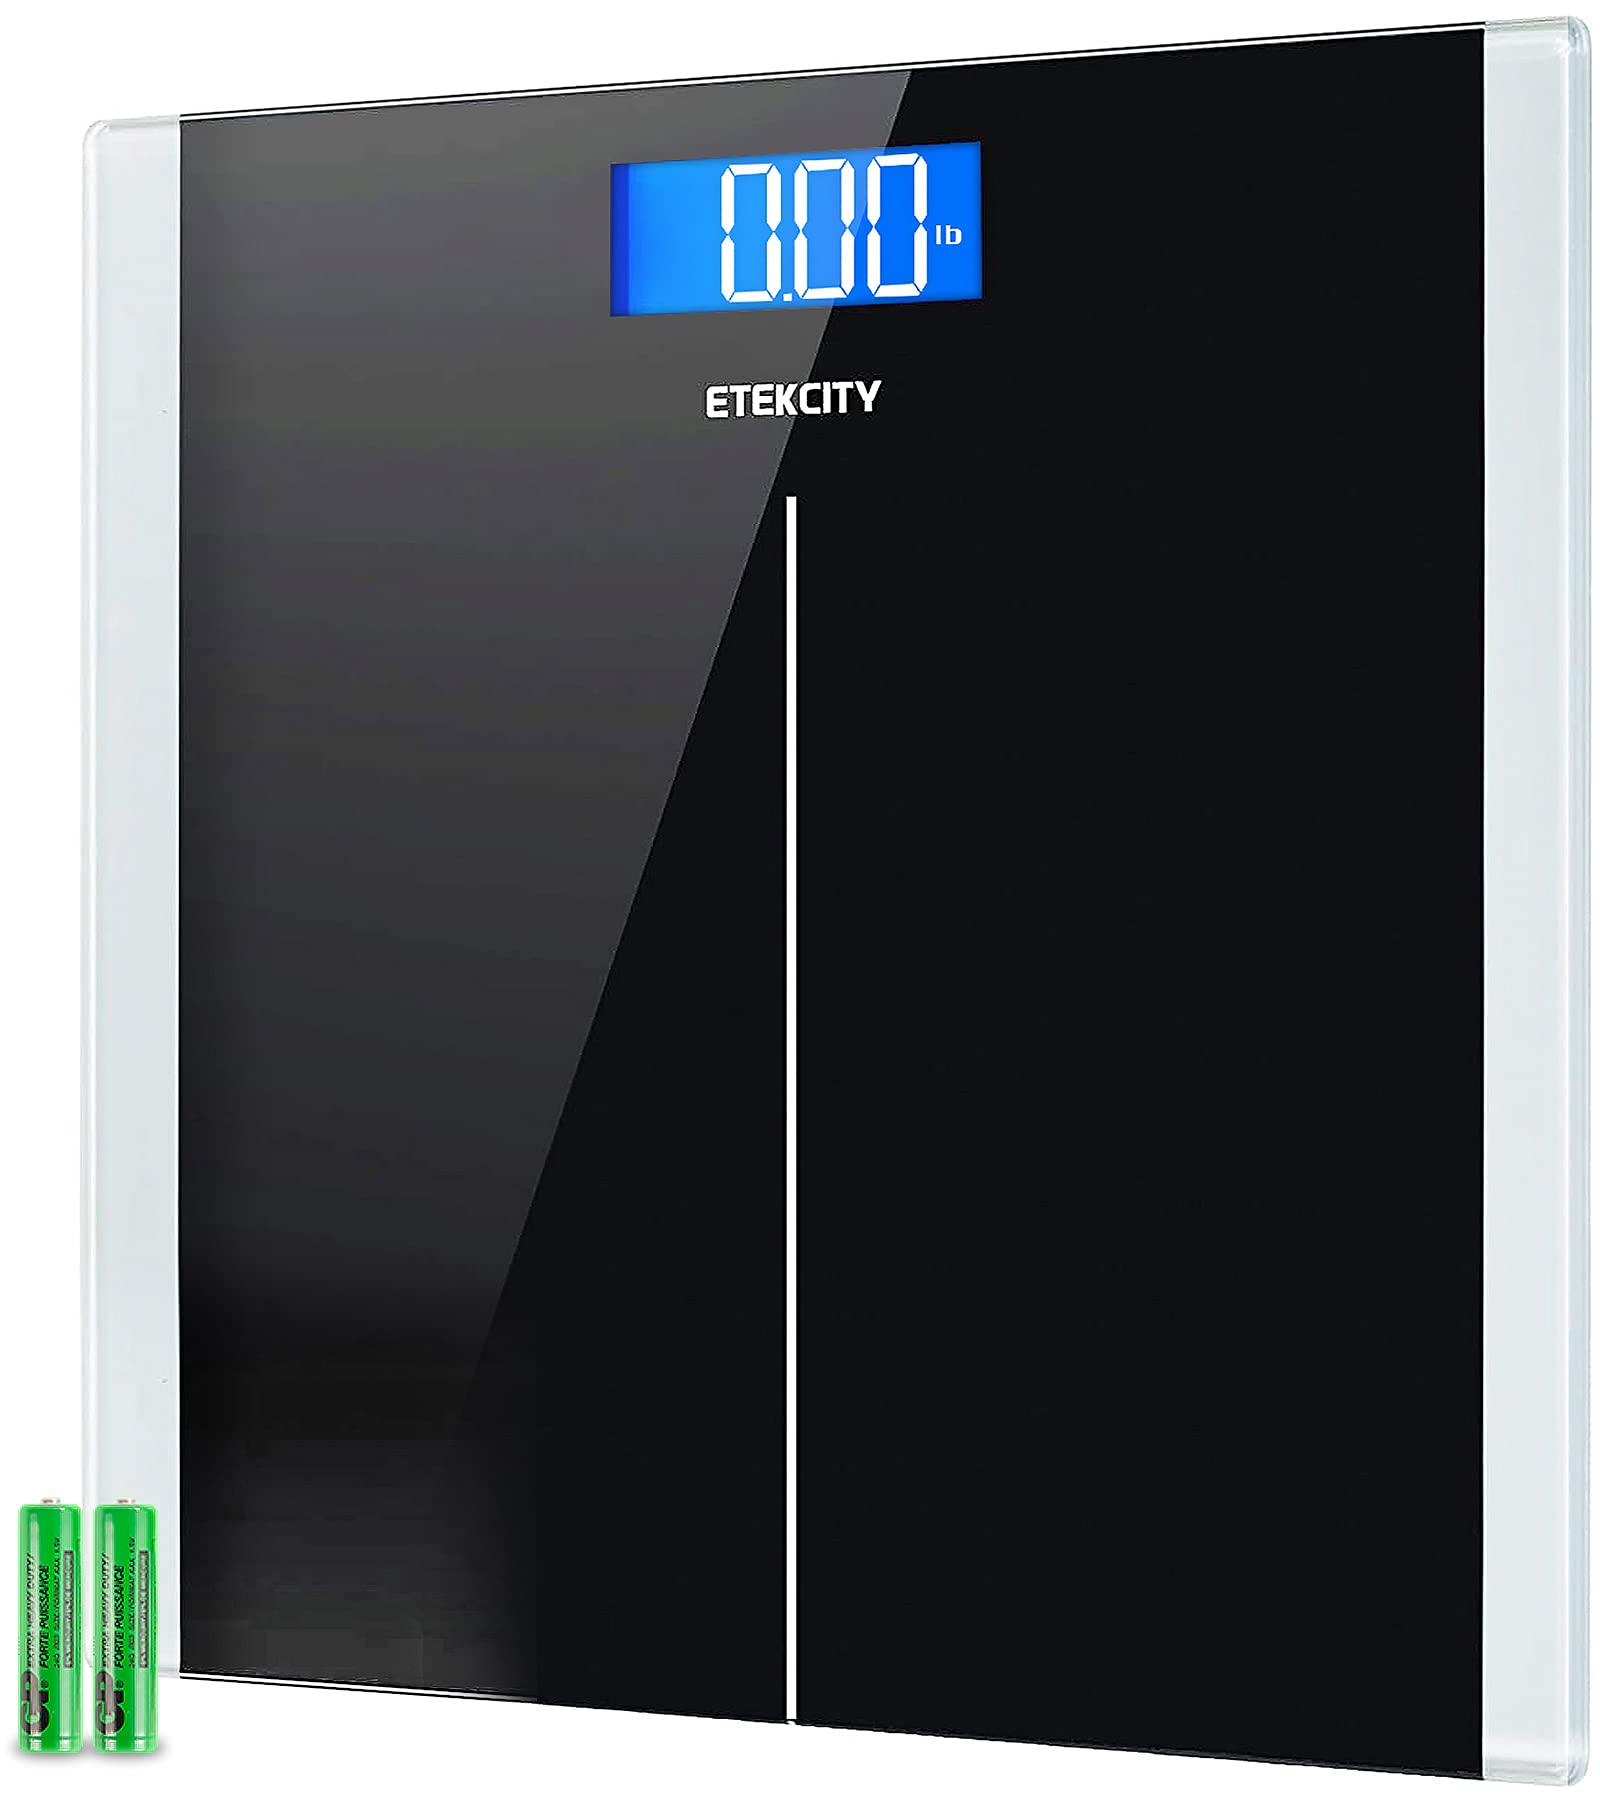 Etekcity Food Scale with Bowl, Timer, and Temperature Sensor, Digital Kitchen Weight for Cooking and Baking, 2.06 QT, Silver & Digital Body Weight Bathroom Scale with Step-On Technology, 400 Lb